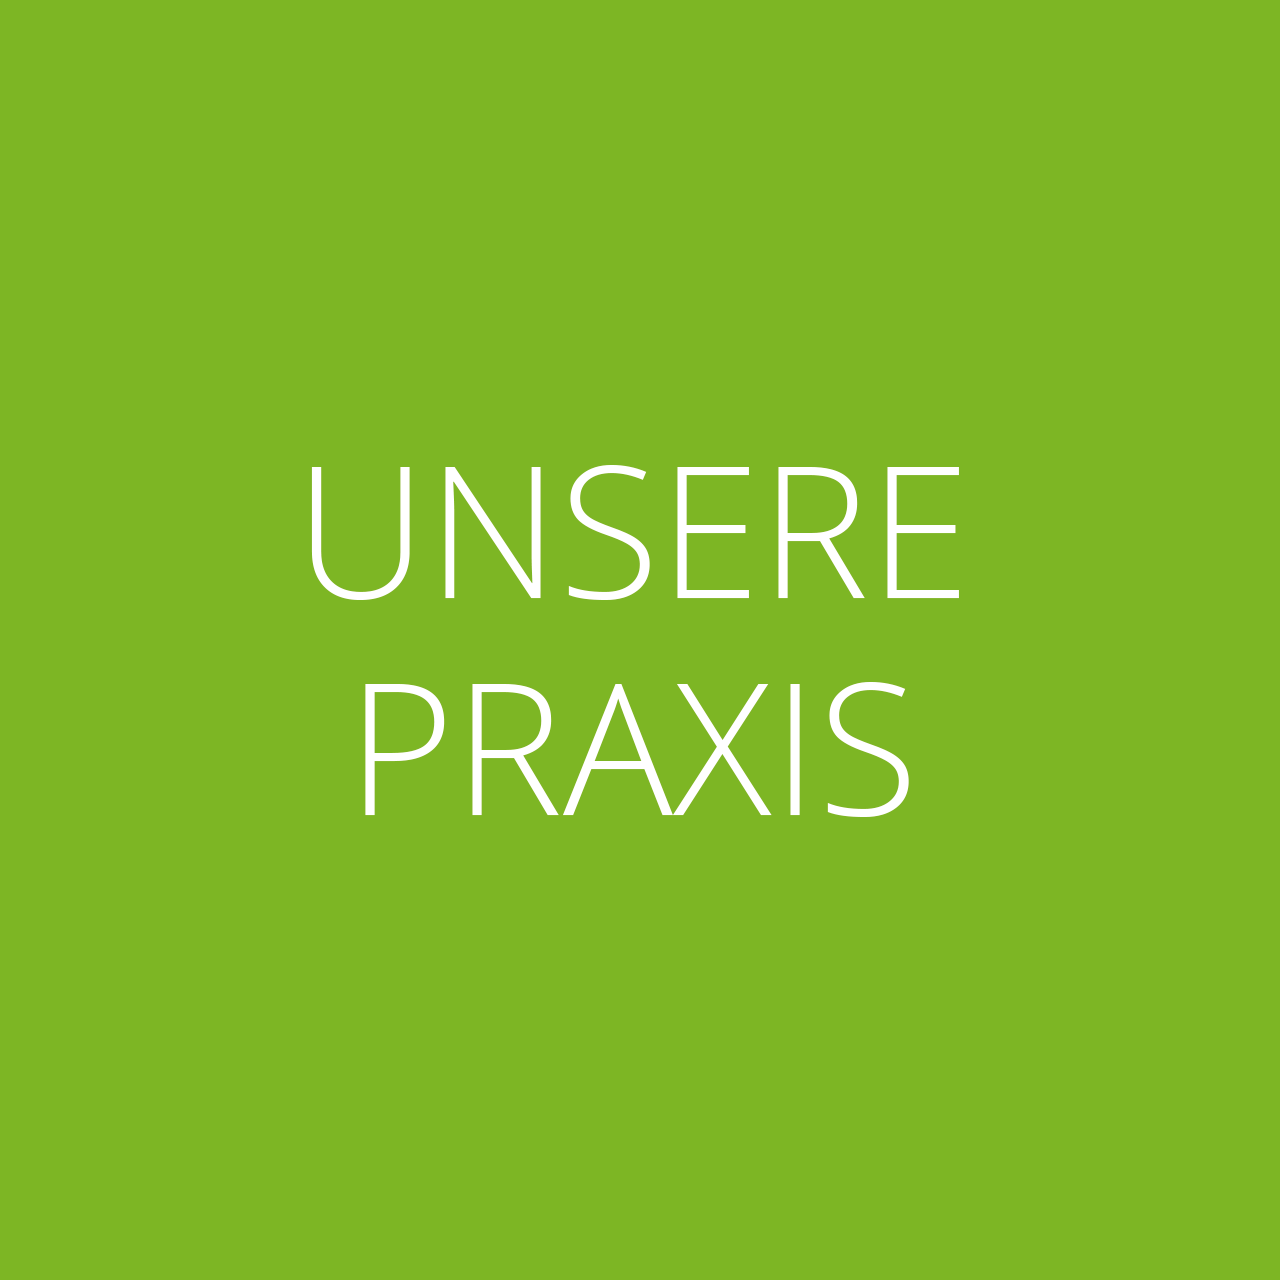 UNSERE PRAXIS